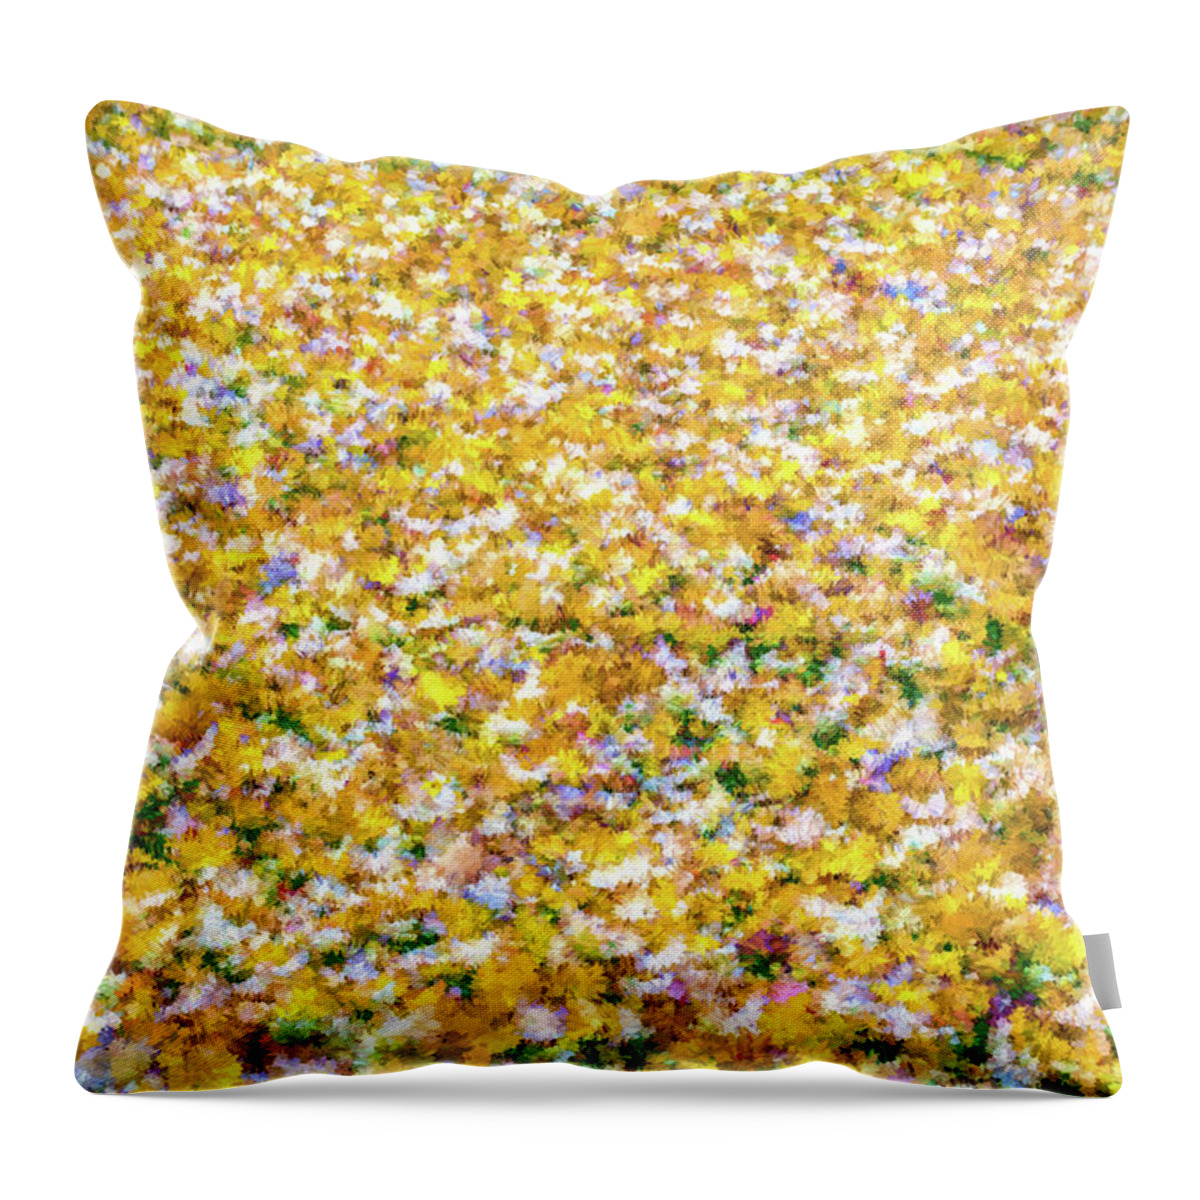 David Letts Throw Pillow featuring the photograph Autumn Abstract by David Letts